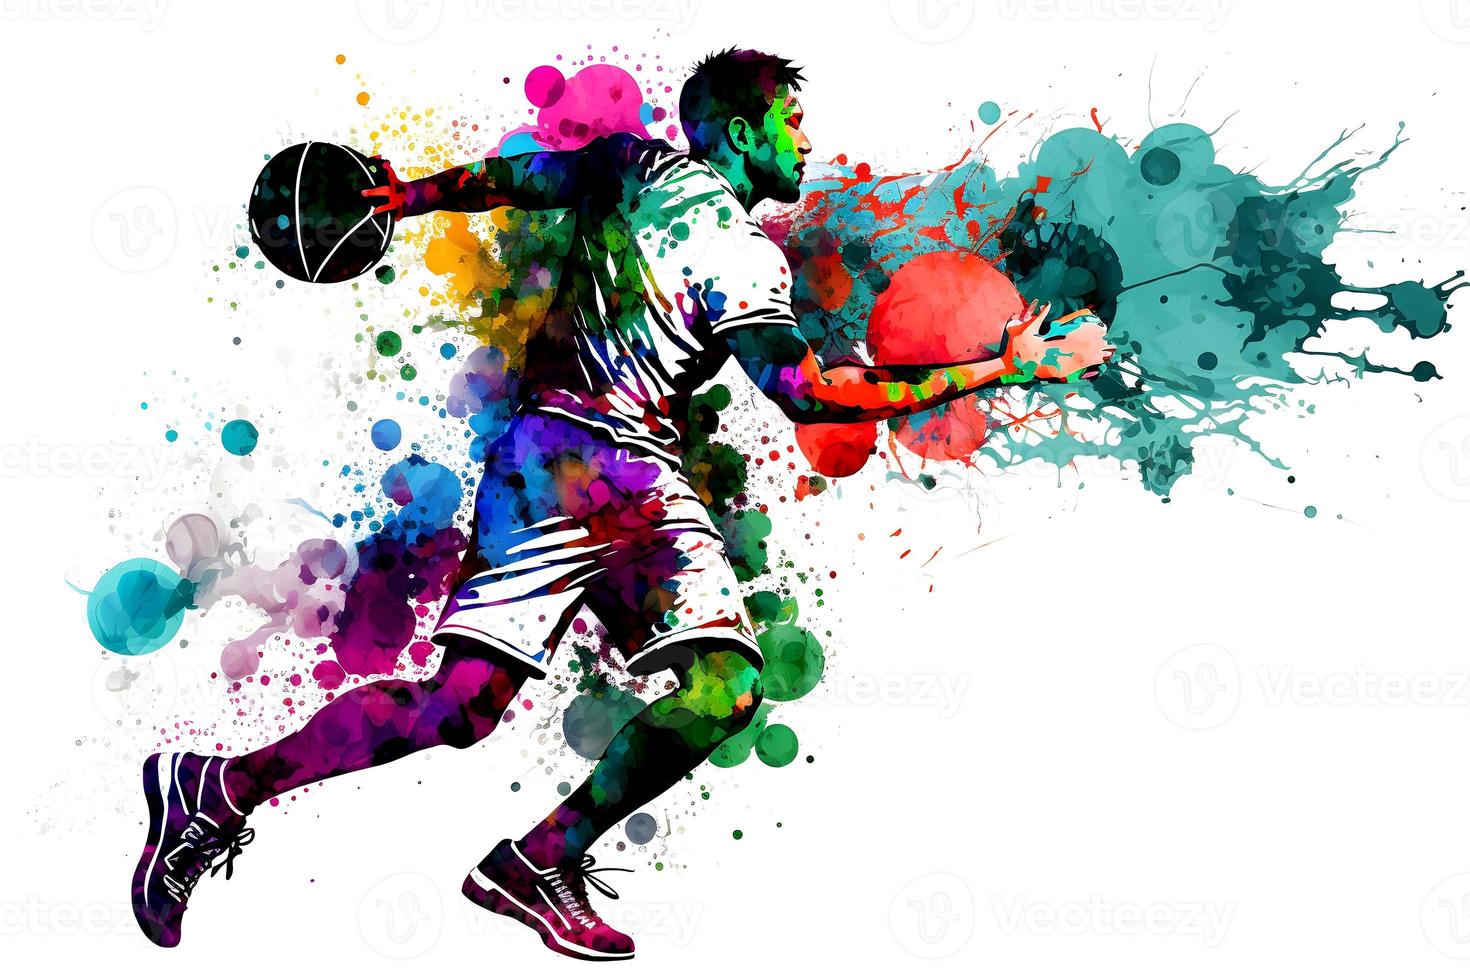 Basketball player in action isolated on white background Stock